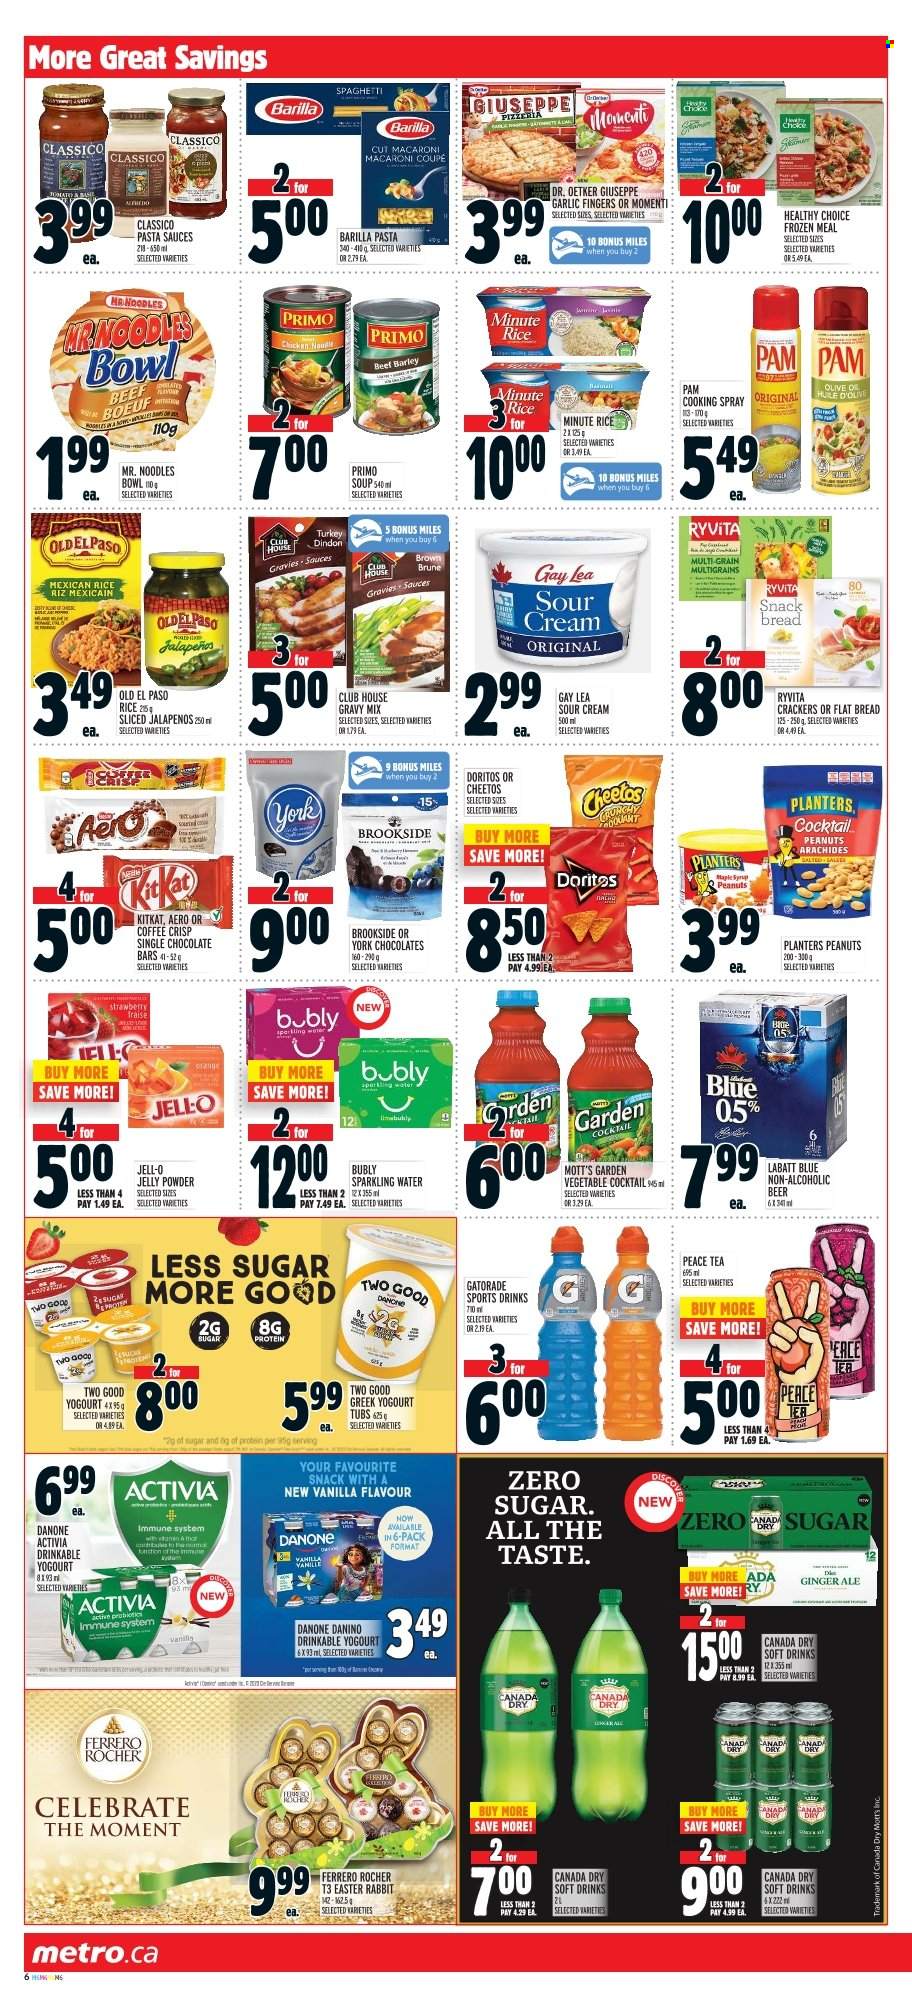 thumbnail - Metro Flyer - March 16, 2023 - March 22, 2023 - Sales products - bread, Old El Paso, garlic, oranges, Mott's, spaghetti, pasta sauce, macaroni, soup, pasta, noodles, Healthy Choice, Dr. Oetker, Activia, sour cream, rabbit, KitKat, jelly, crackers, chocolate rabbit, chocolate bar, Doritos, Cheetos, Jell-O, rice, gravy mix, Classico, cooking spray, maple syrup, syrup, peanuts, Planters, Canada Dry, ginger ale, soft drink, Gatorade, sparkling water, water, tea, beer, bowl, Salomon, Danone, Ferrero Rocher, Barilla. Page 11.